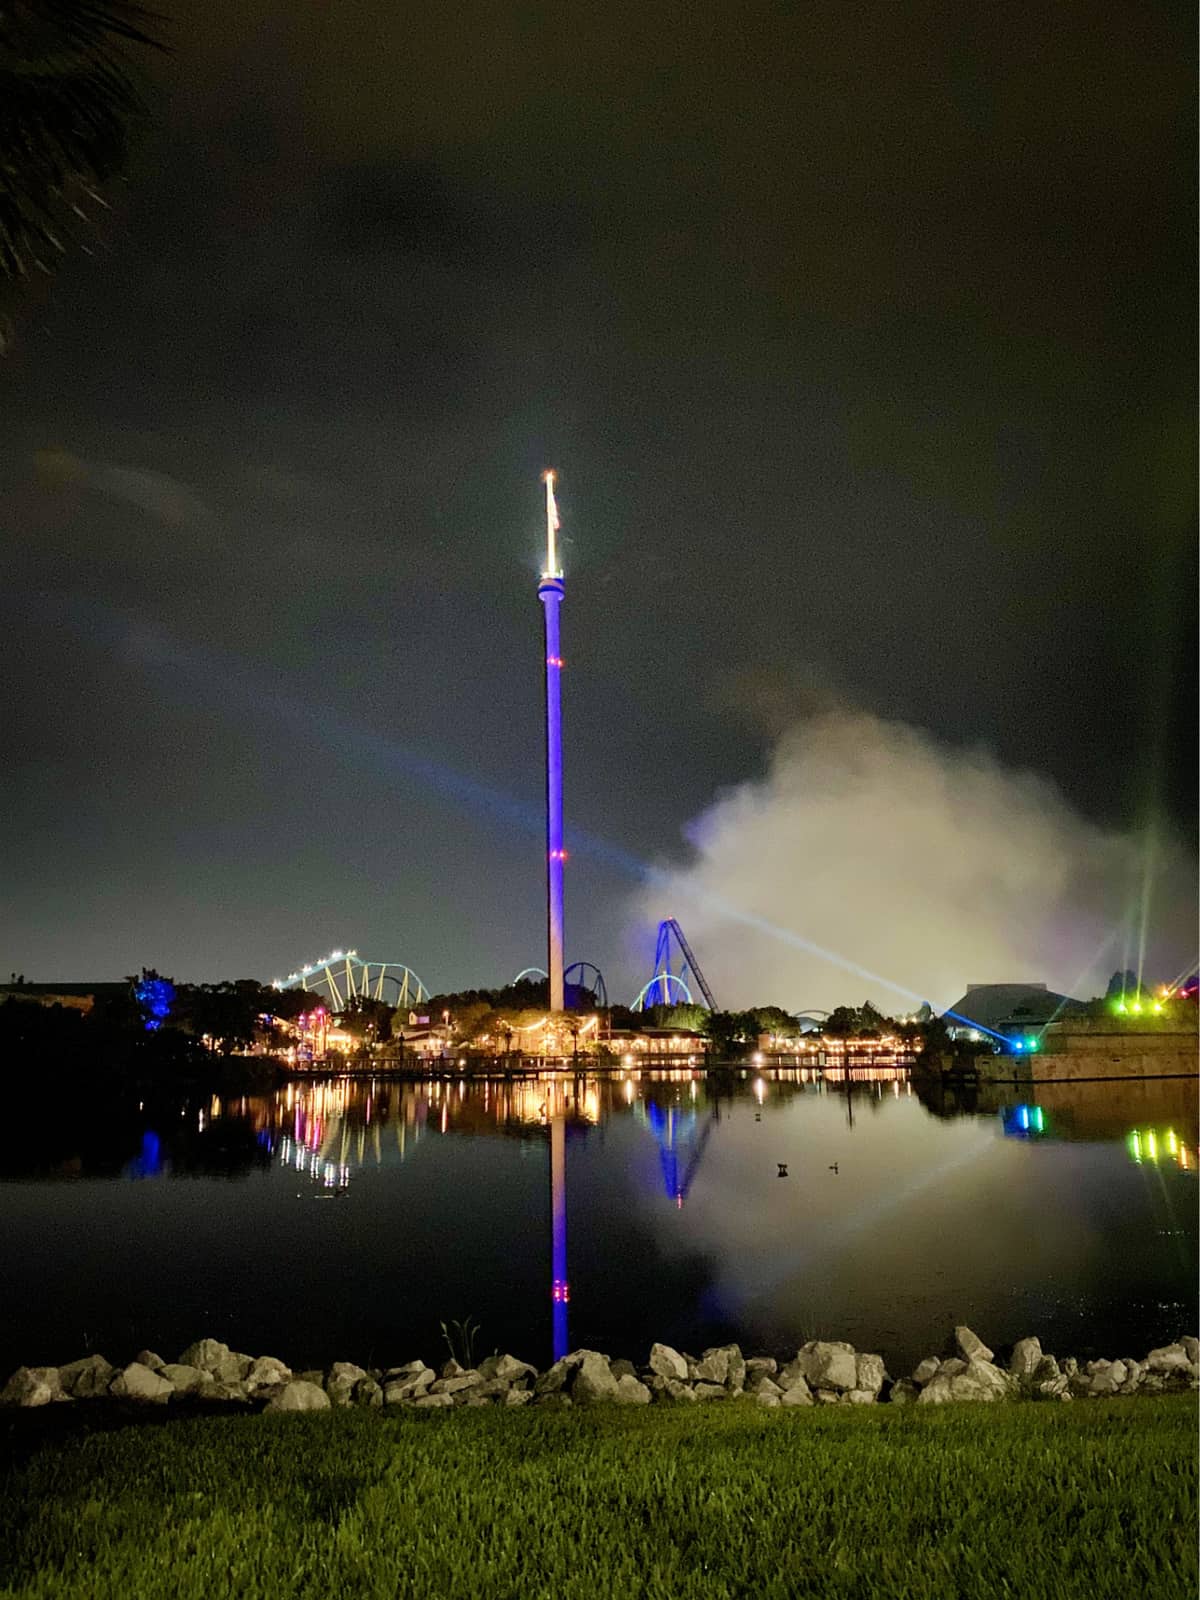 Nightime sky of SeaWorld Orlando over looking a pond with coasters in the distance.